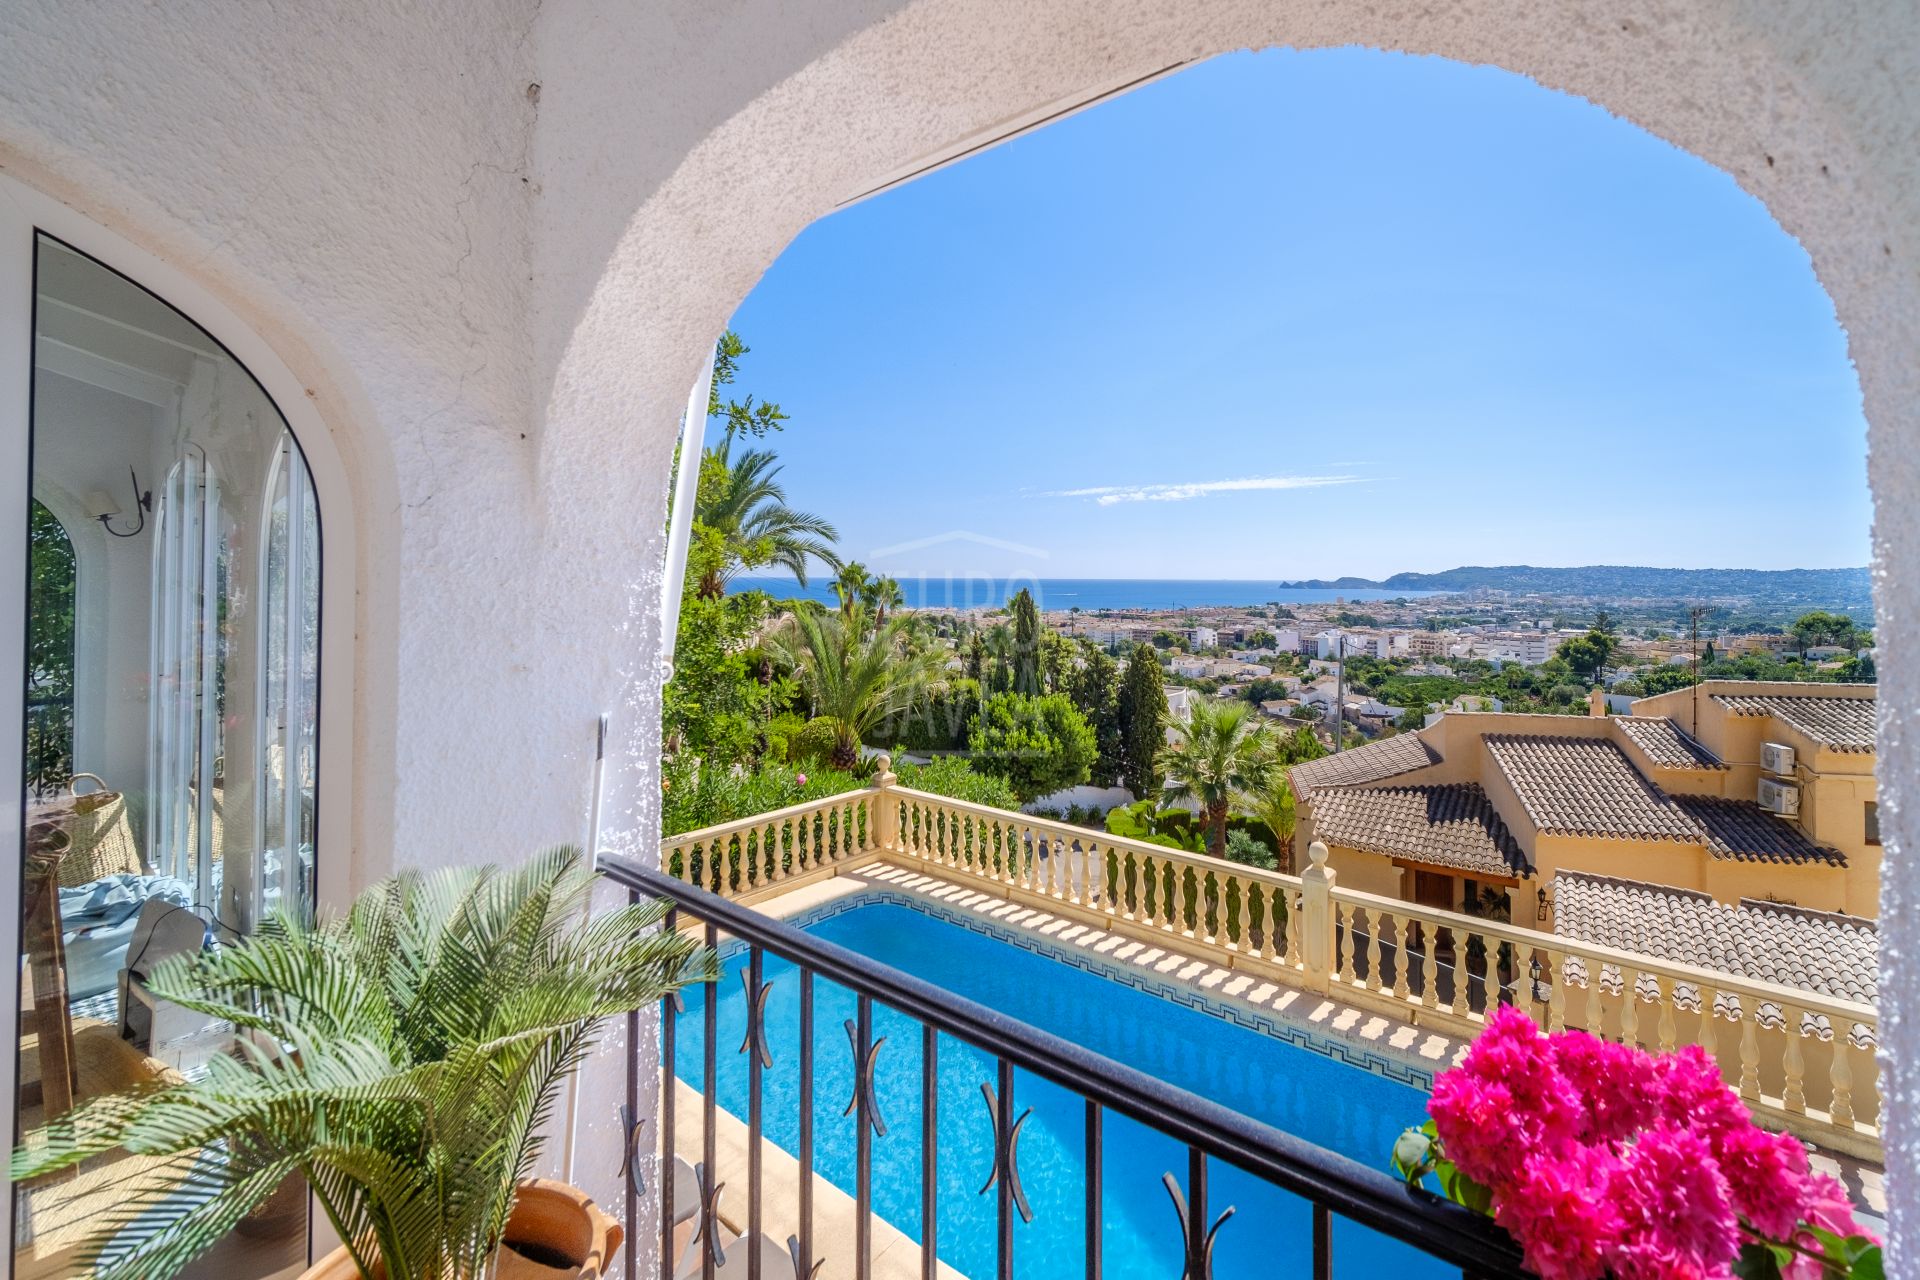 Villa for sale in Jávea, exclusively with Eurojavea , in the area of Puchol , close to the old town and the port . With sea views